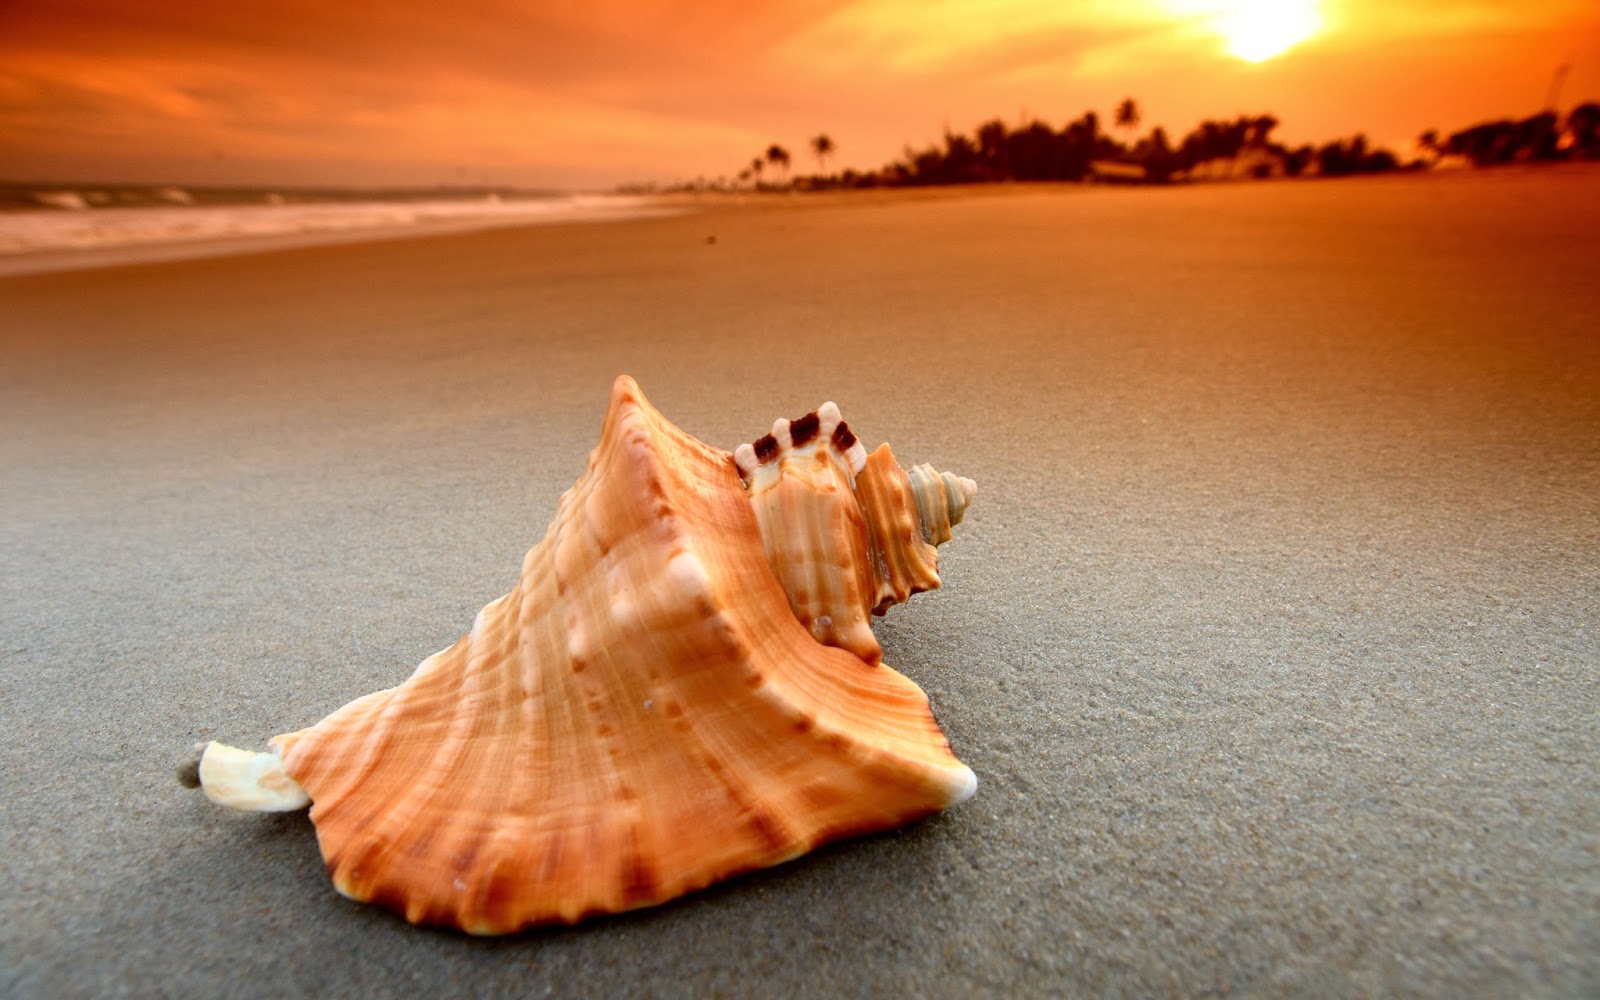 Shells In The Sunset Wallpaper Wide HD